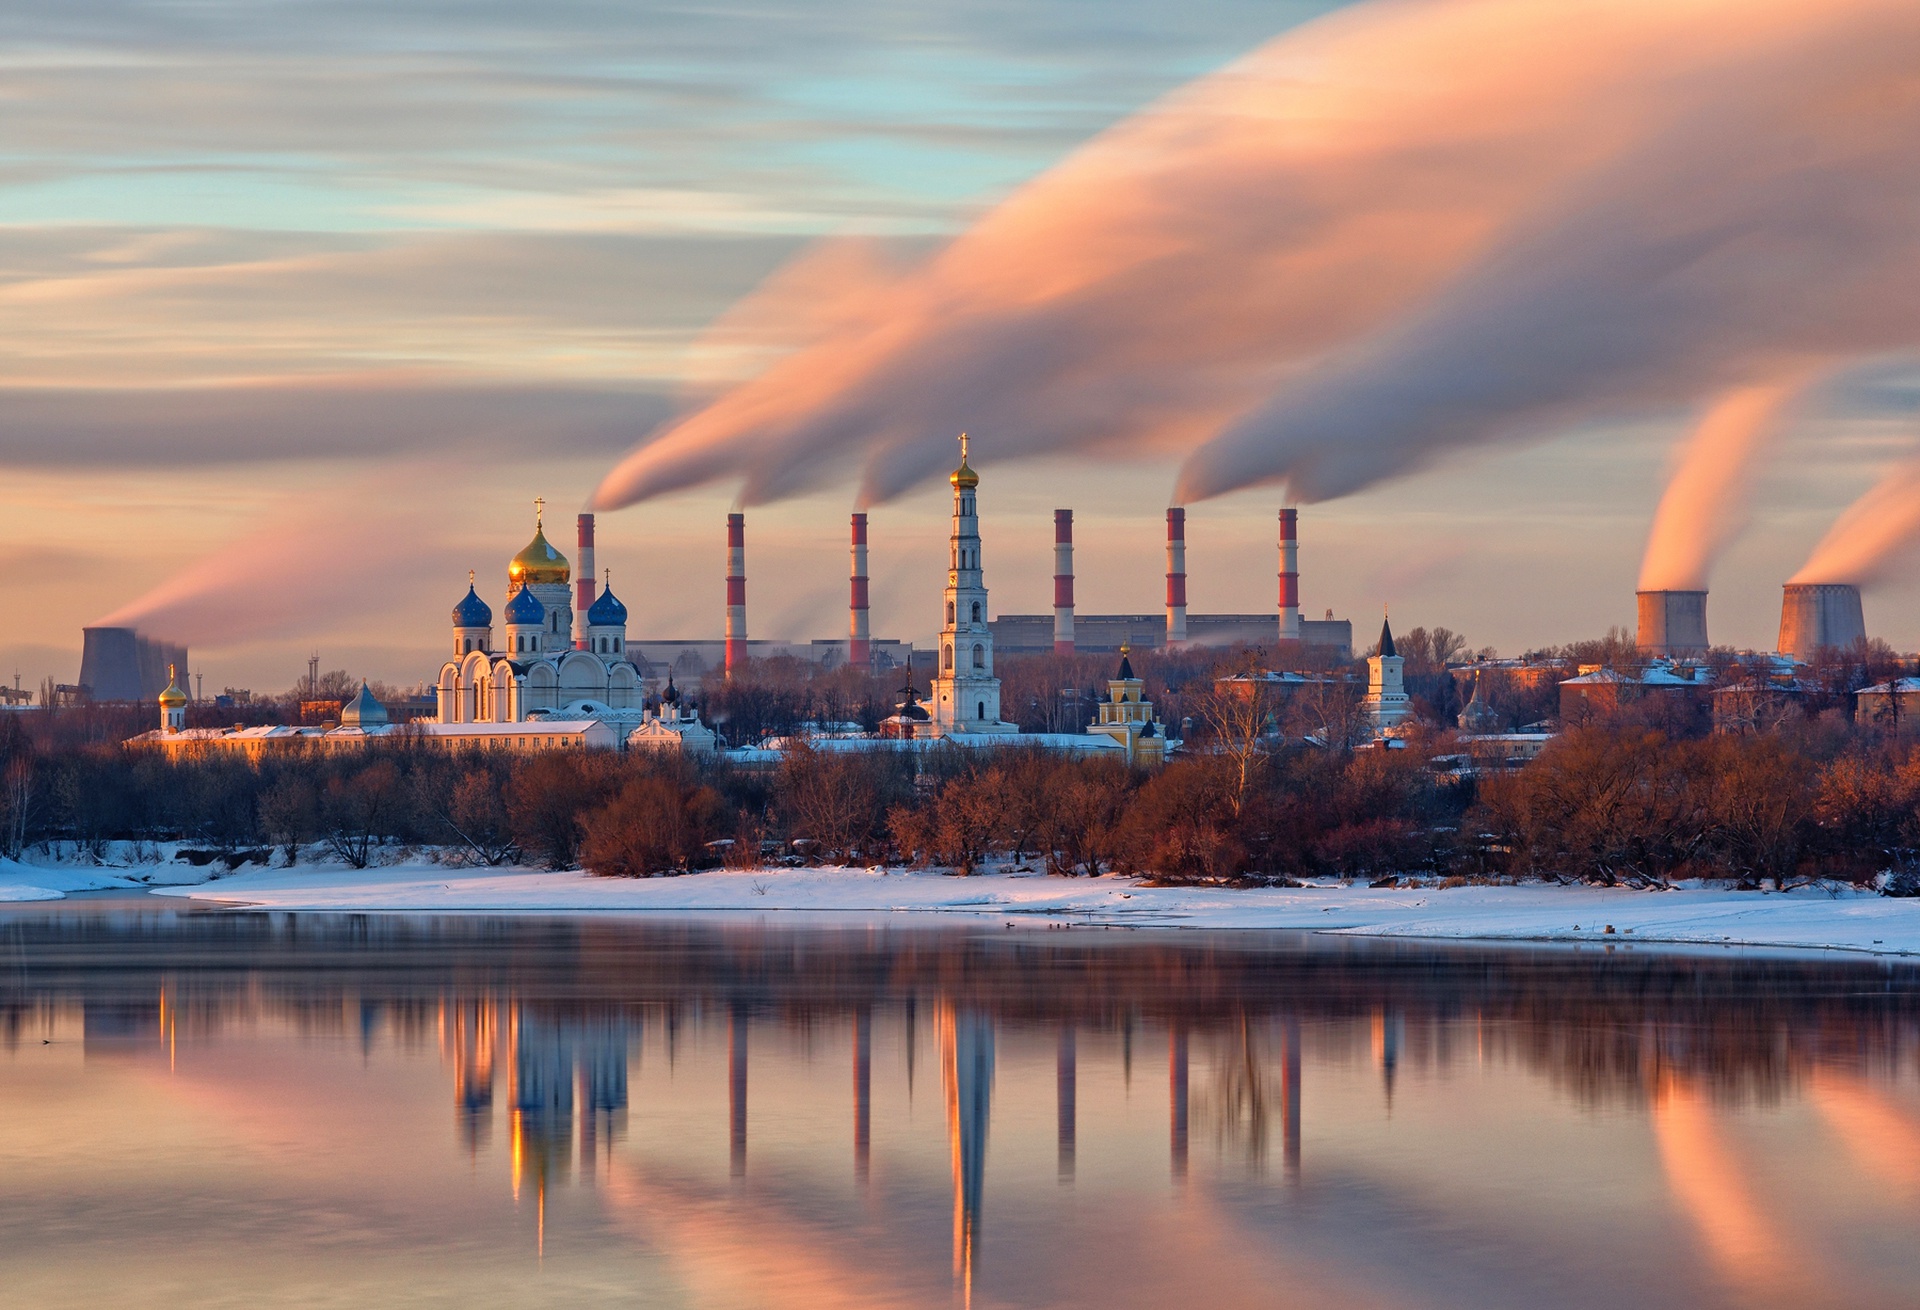 wallpaper pictures hd,sky,reflection,water,industry,power station